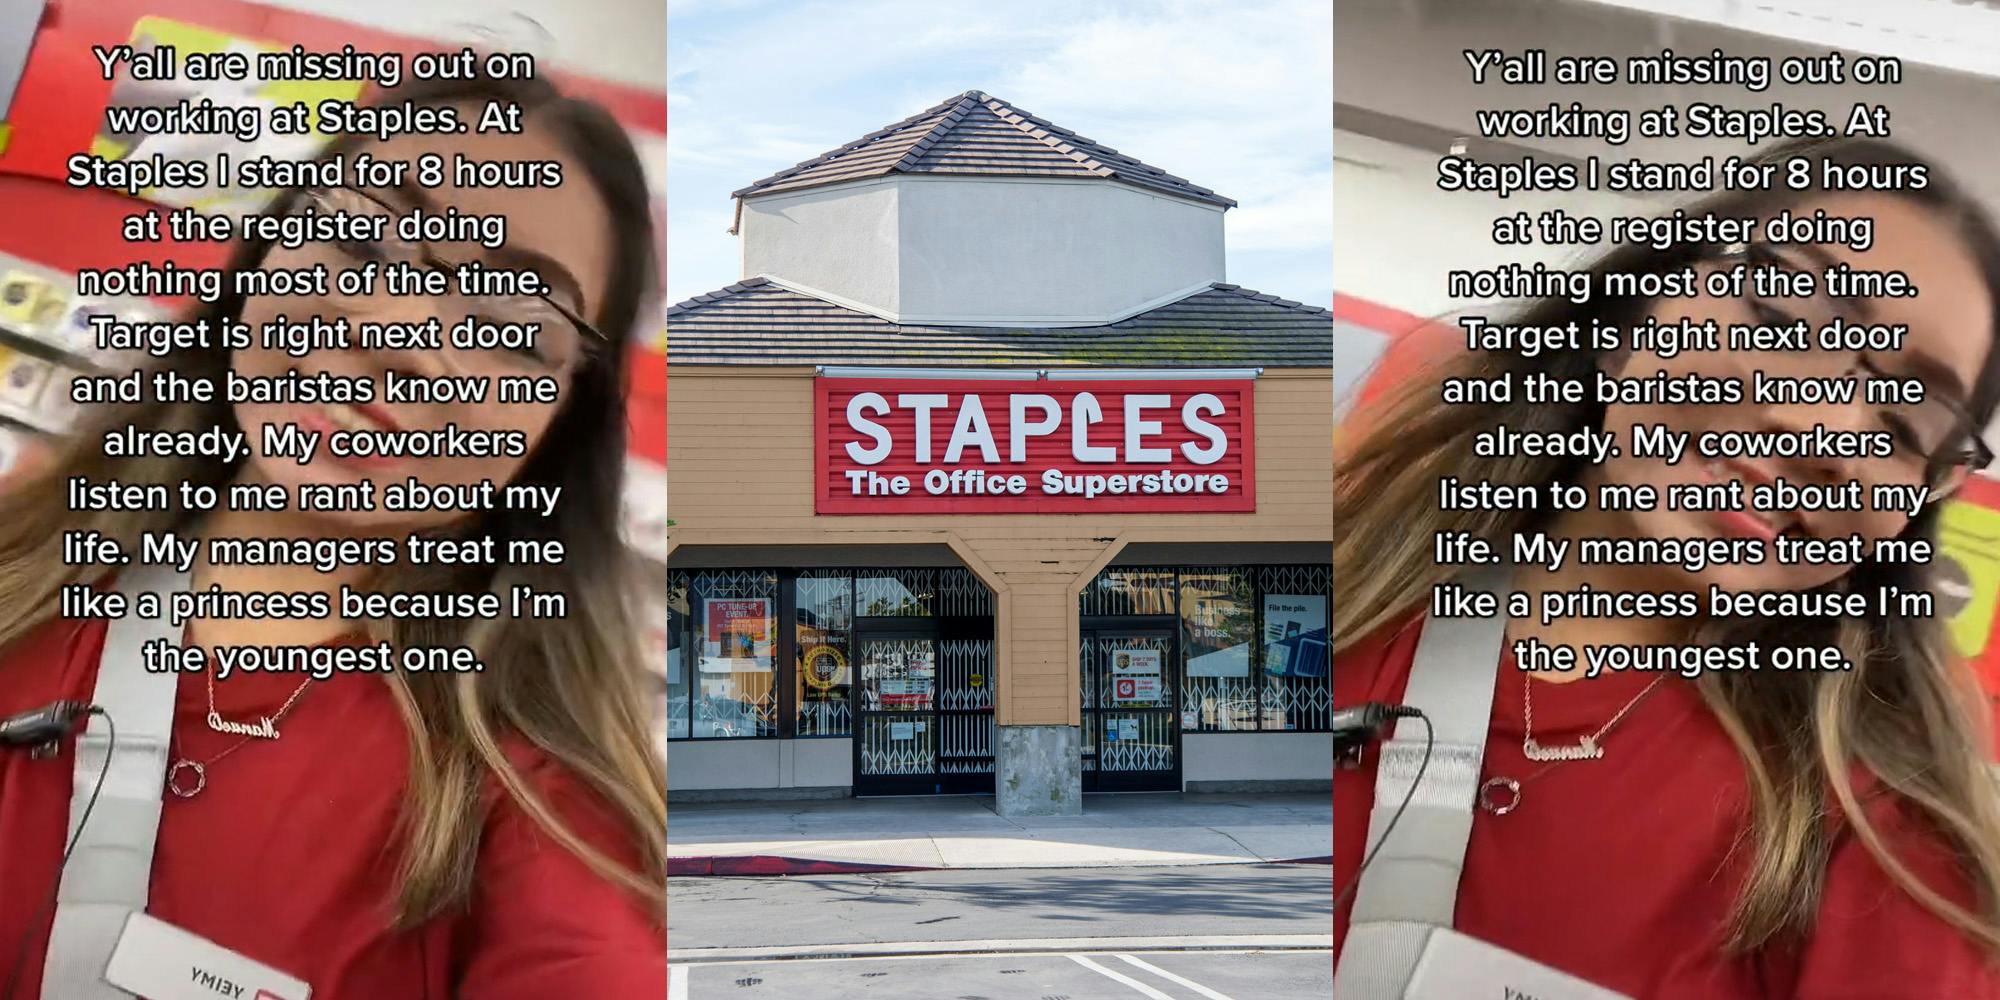 Staples Worker Says People are Missing Out on Working There